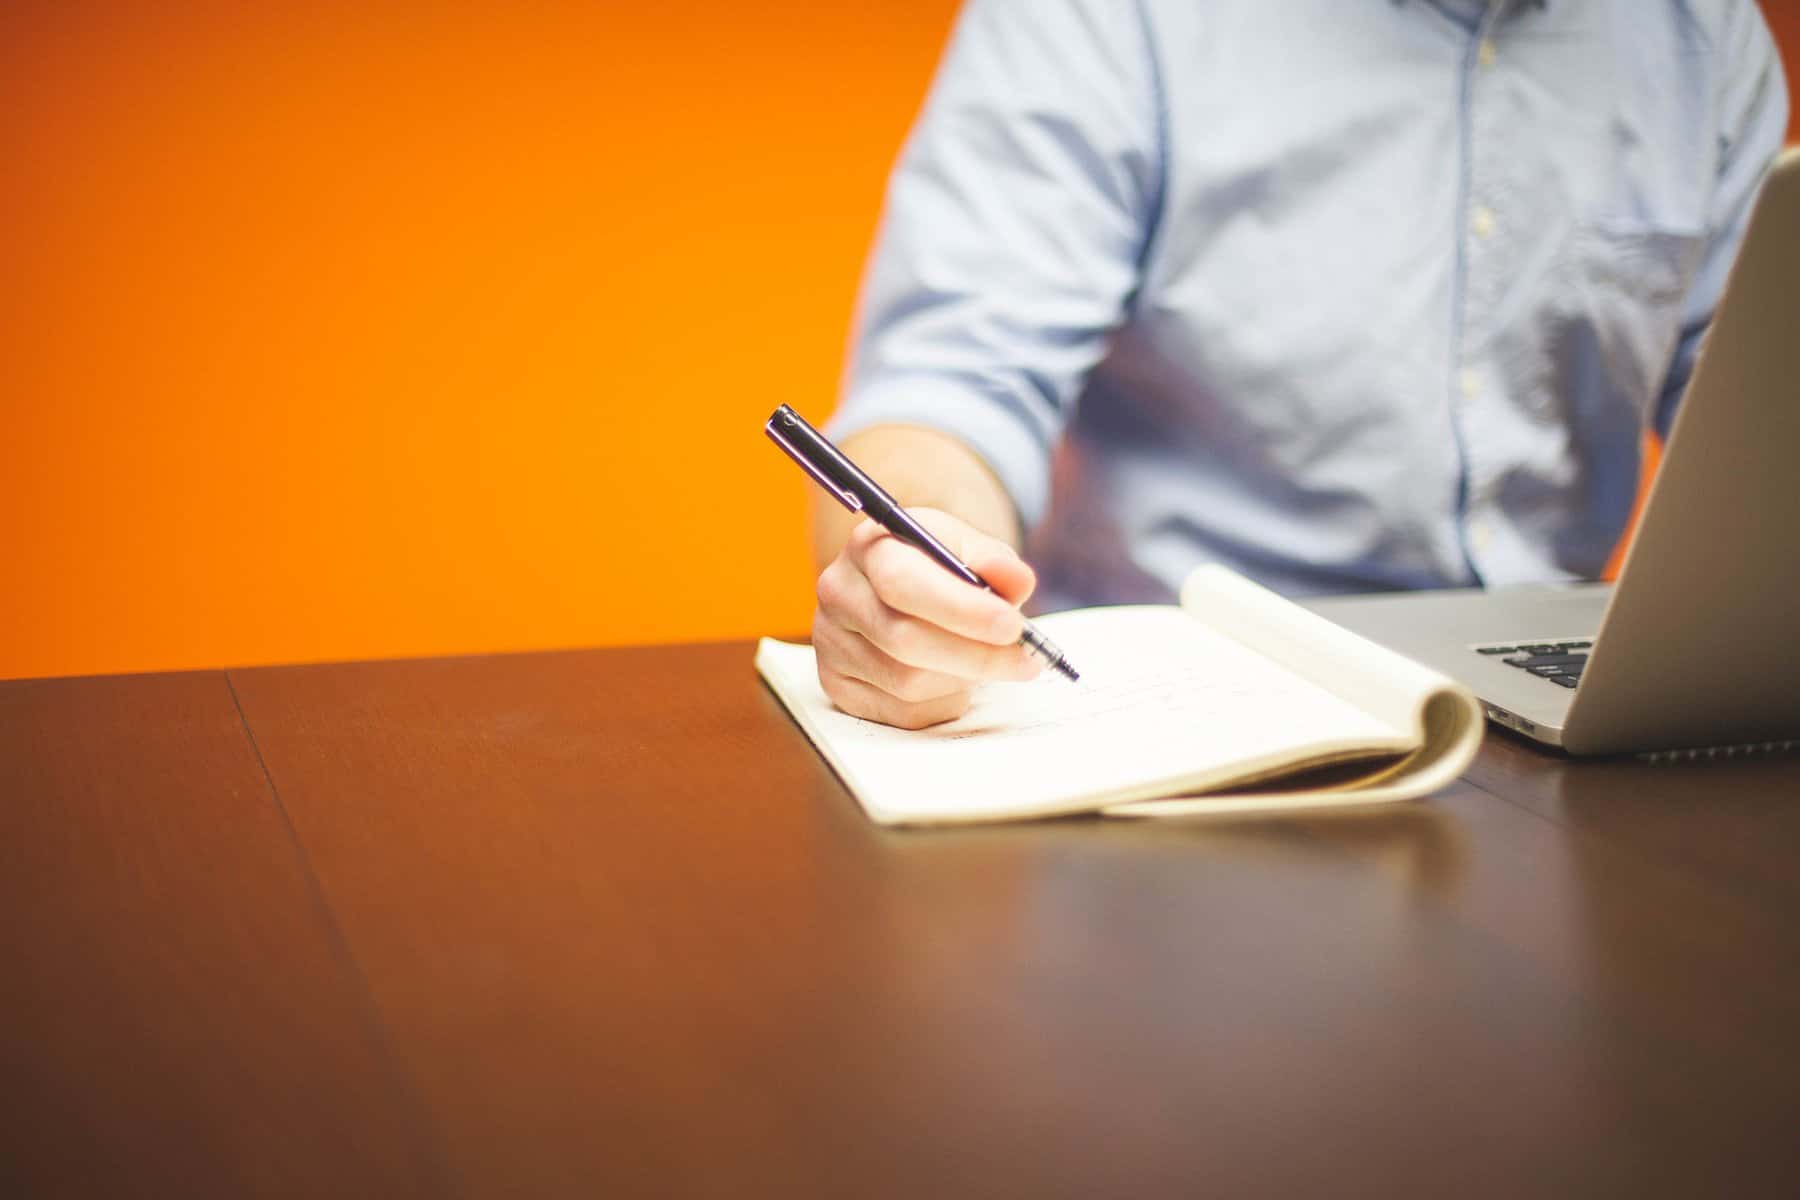 The torso of a man is shown sitting at a computer and writing on a pad of paper against an orange background.